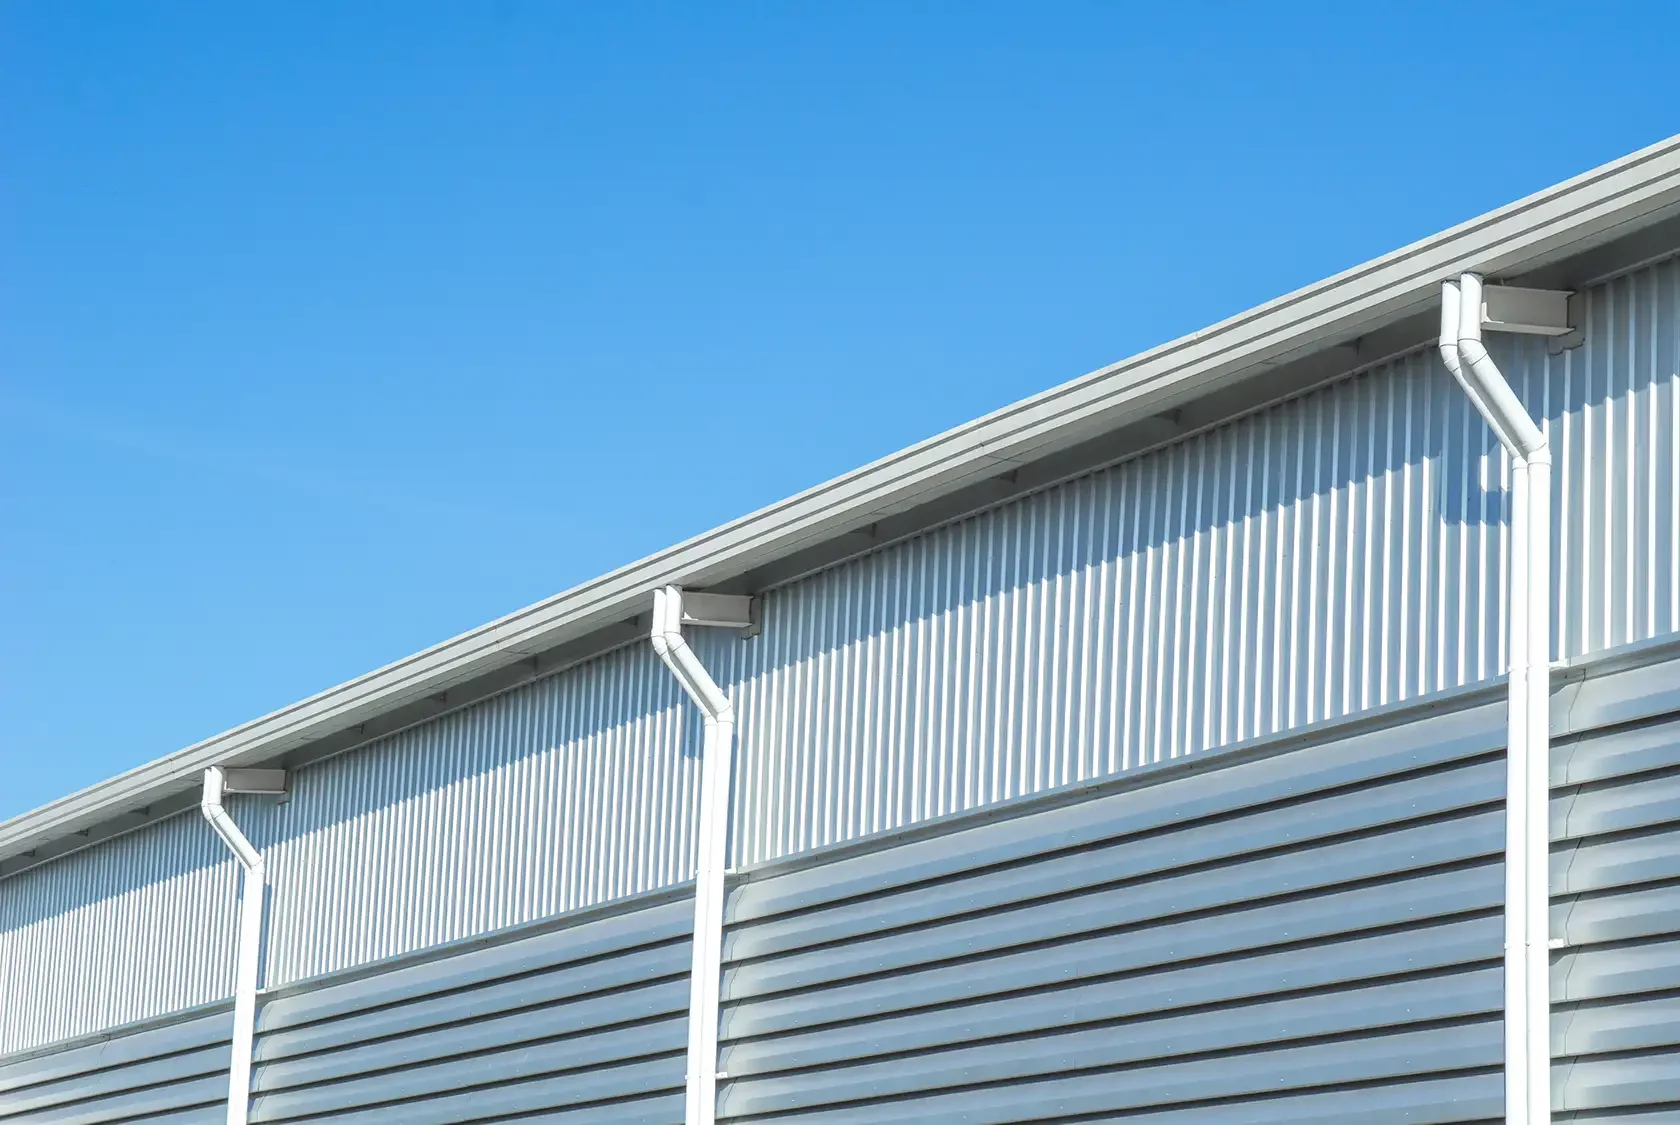 Commercial gutter system for large warehouse - Breese, IL